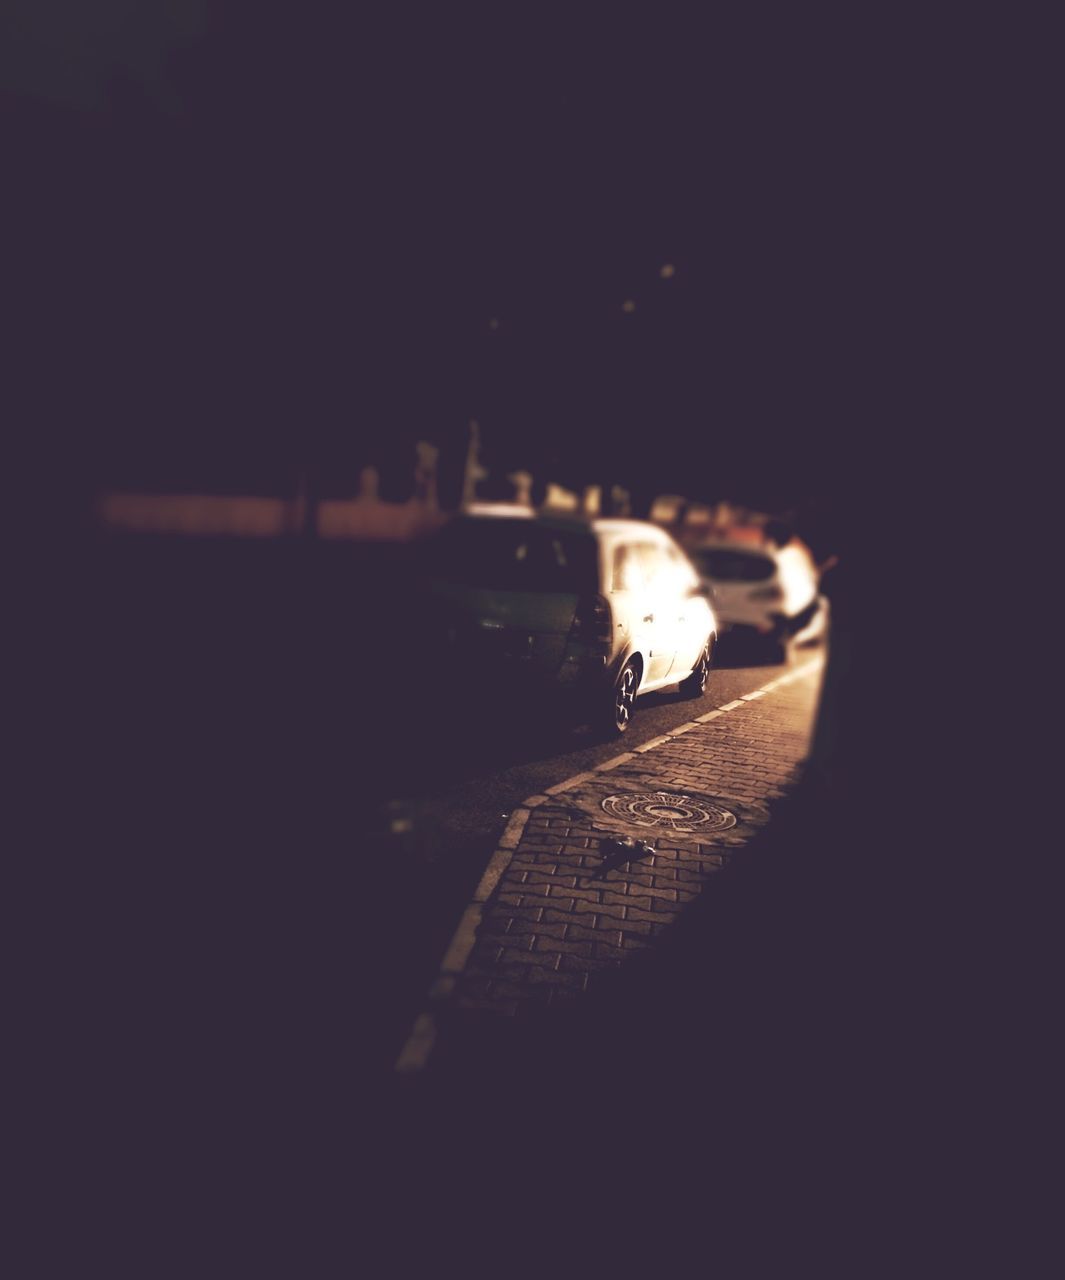 night, dark, silhouette, animal themes, one animal, illuminated, copy space, shadow, sunlight, outdoors, selective focus, unrecognizable person, full length, street, walking, wildlife